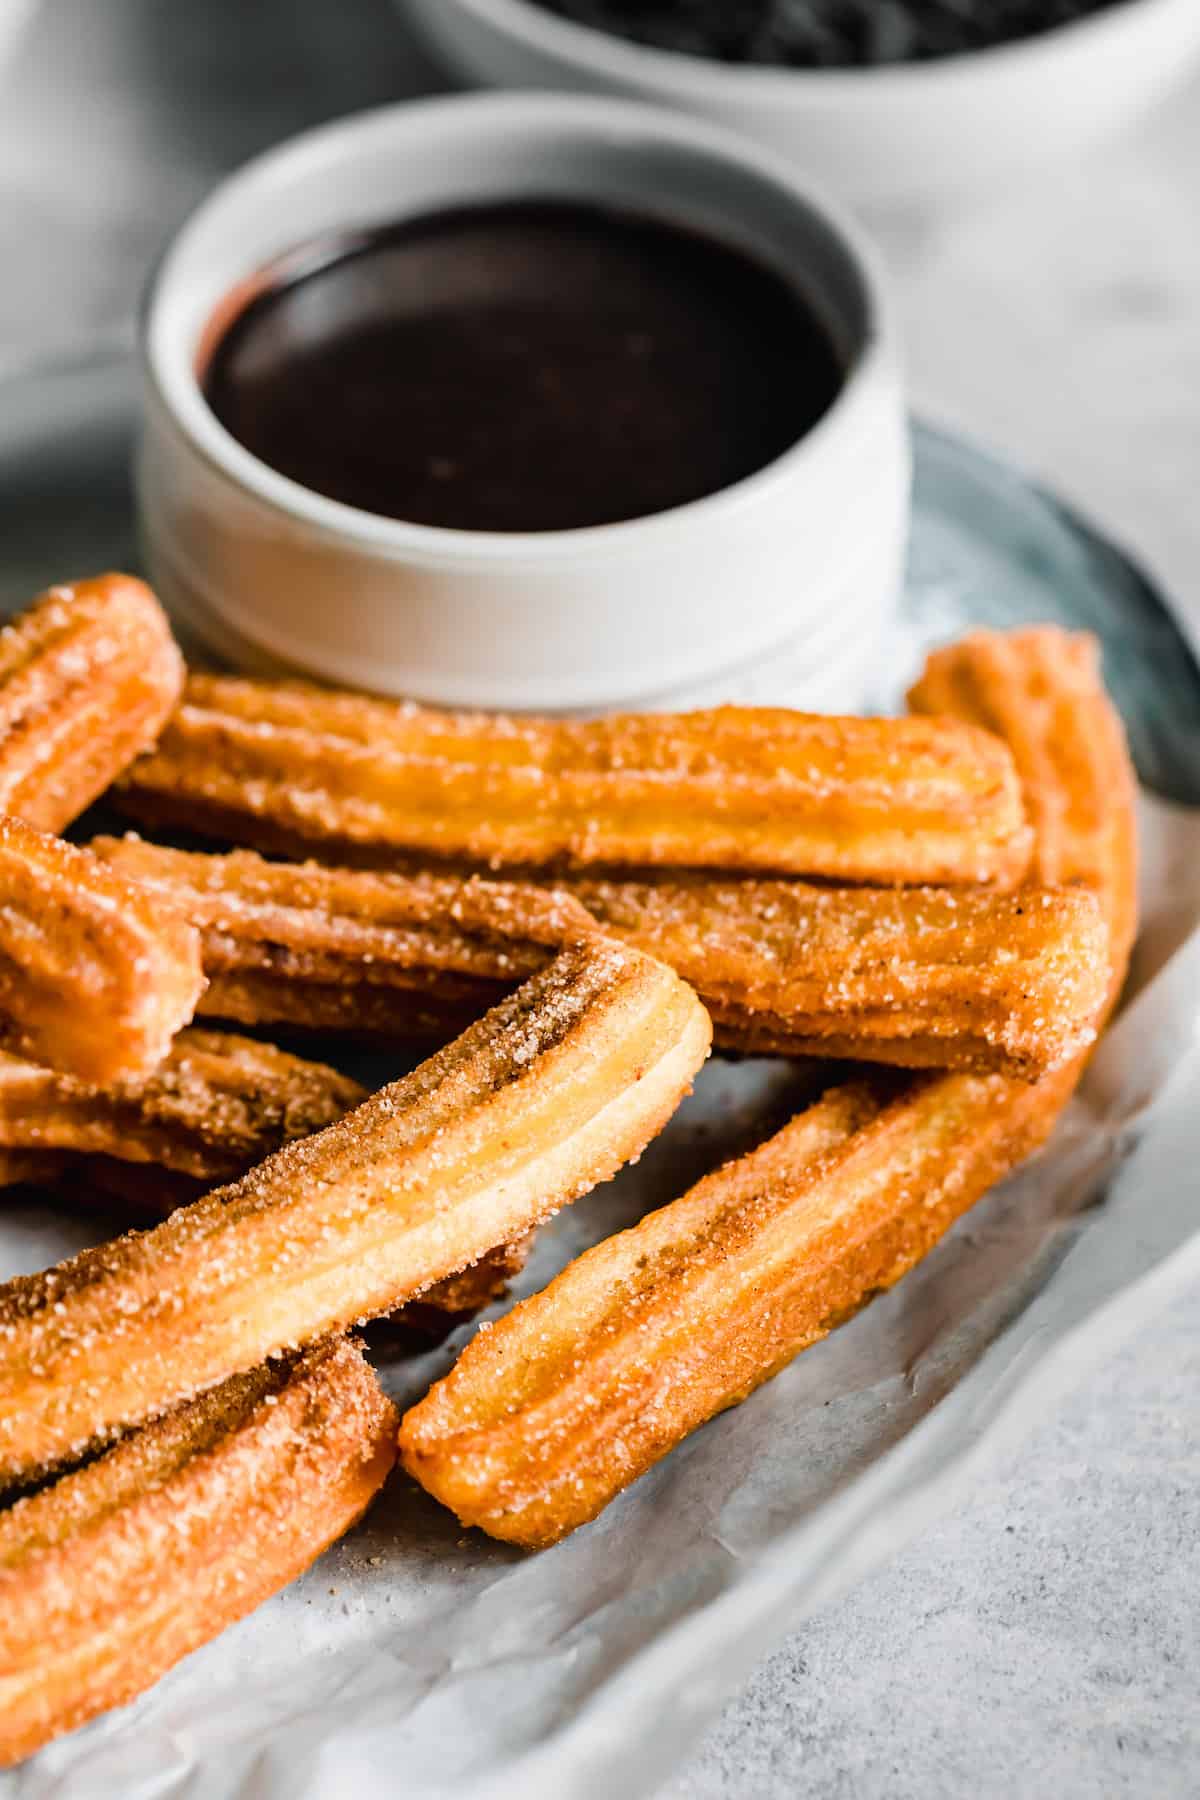 A Plate of Homemade Churros Next to a Dish of Chocolate Sauce